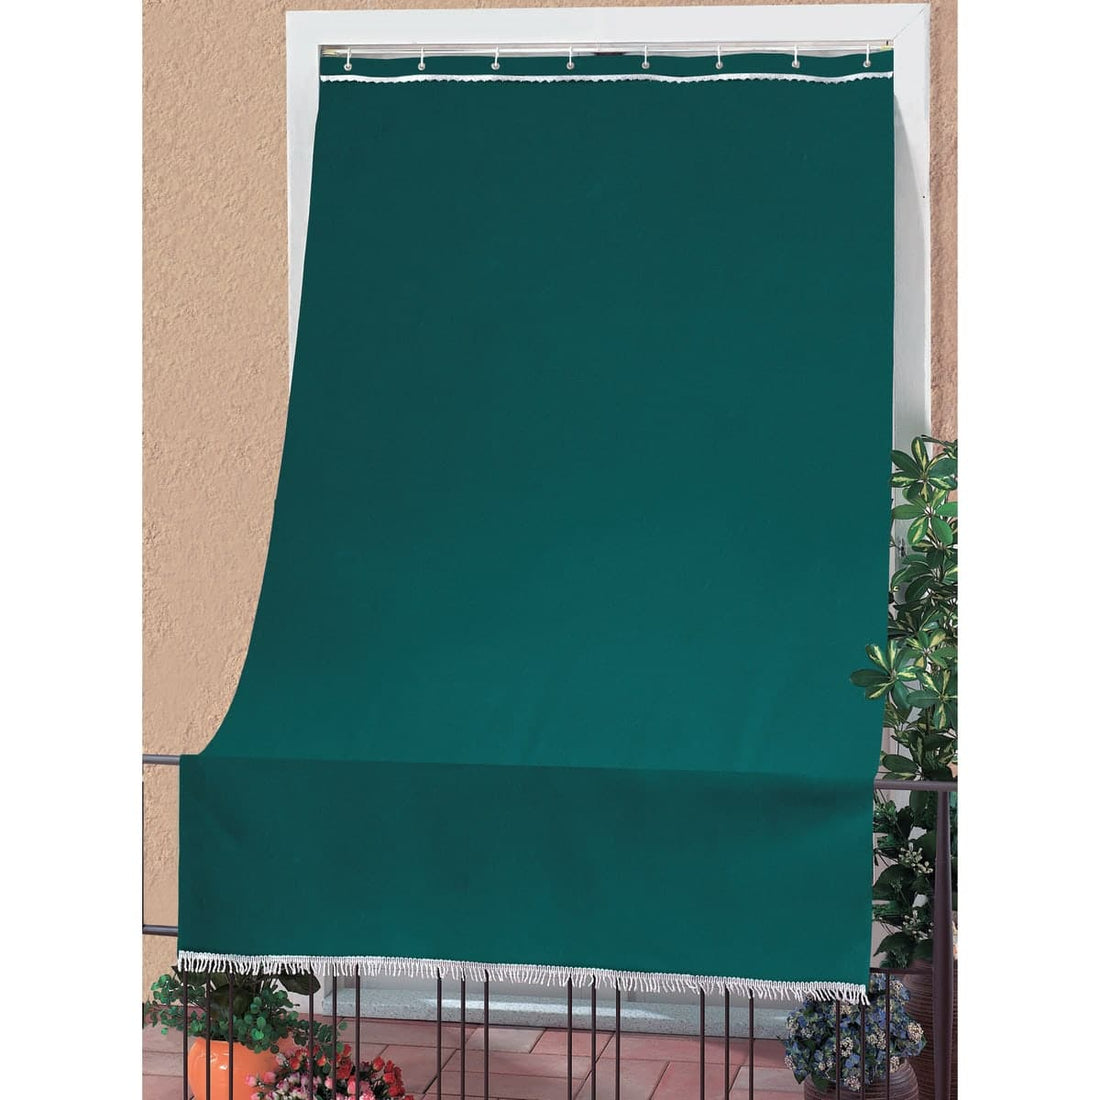 CARIBBEAN BALCONY AWNING 140X300 GREEN W/HANGINGS AND HOOKS - best price from Maltashopper.com BR480670165